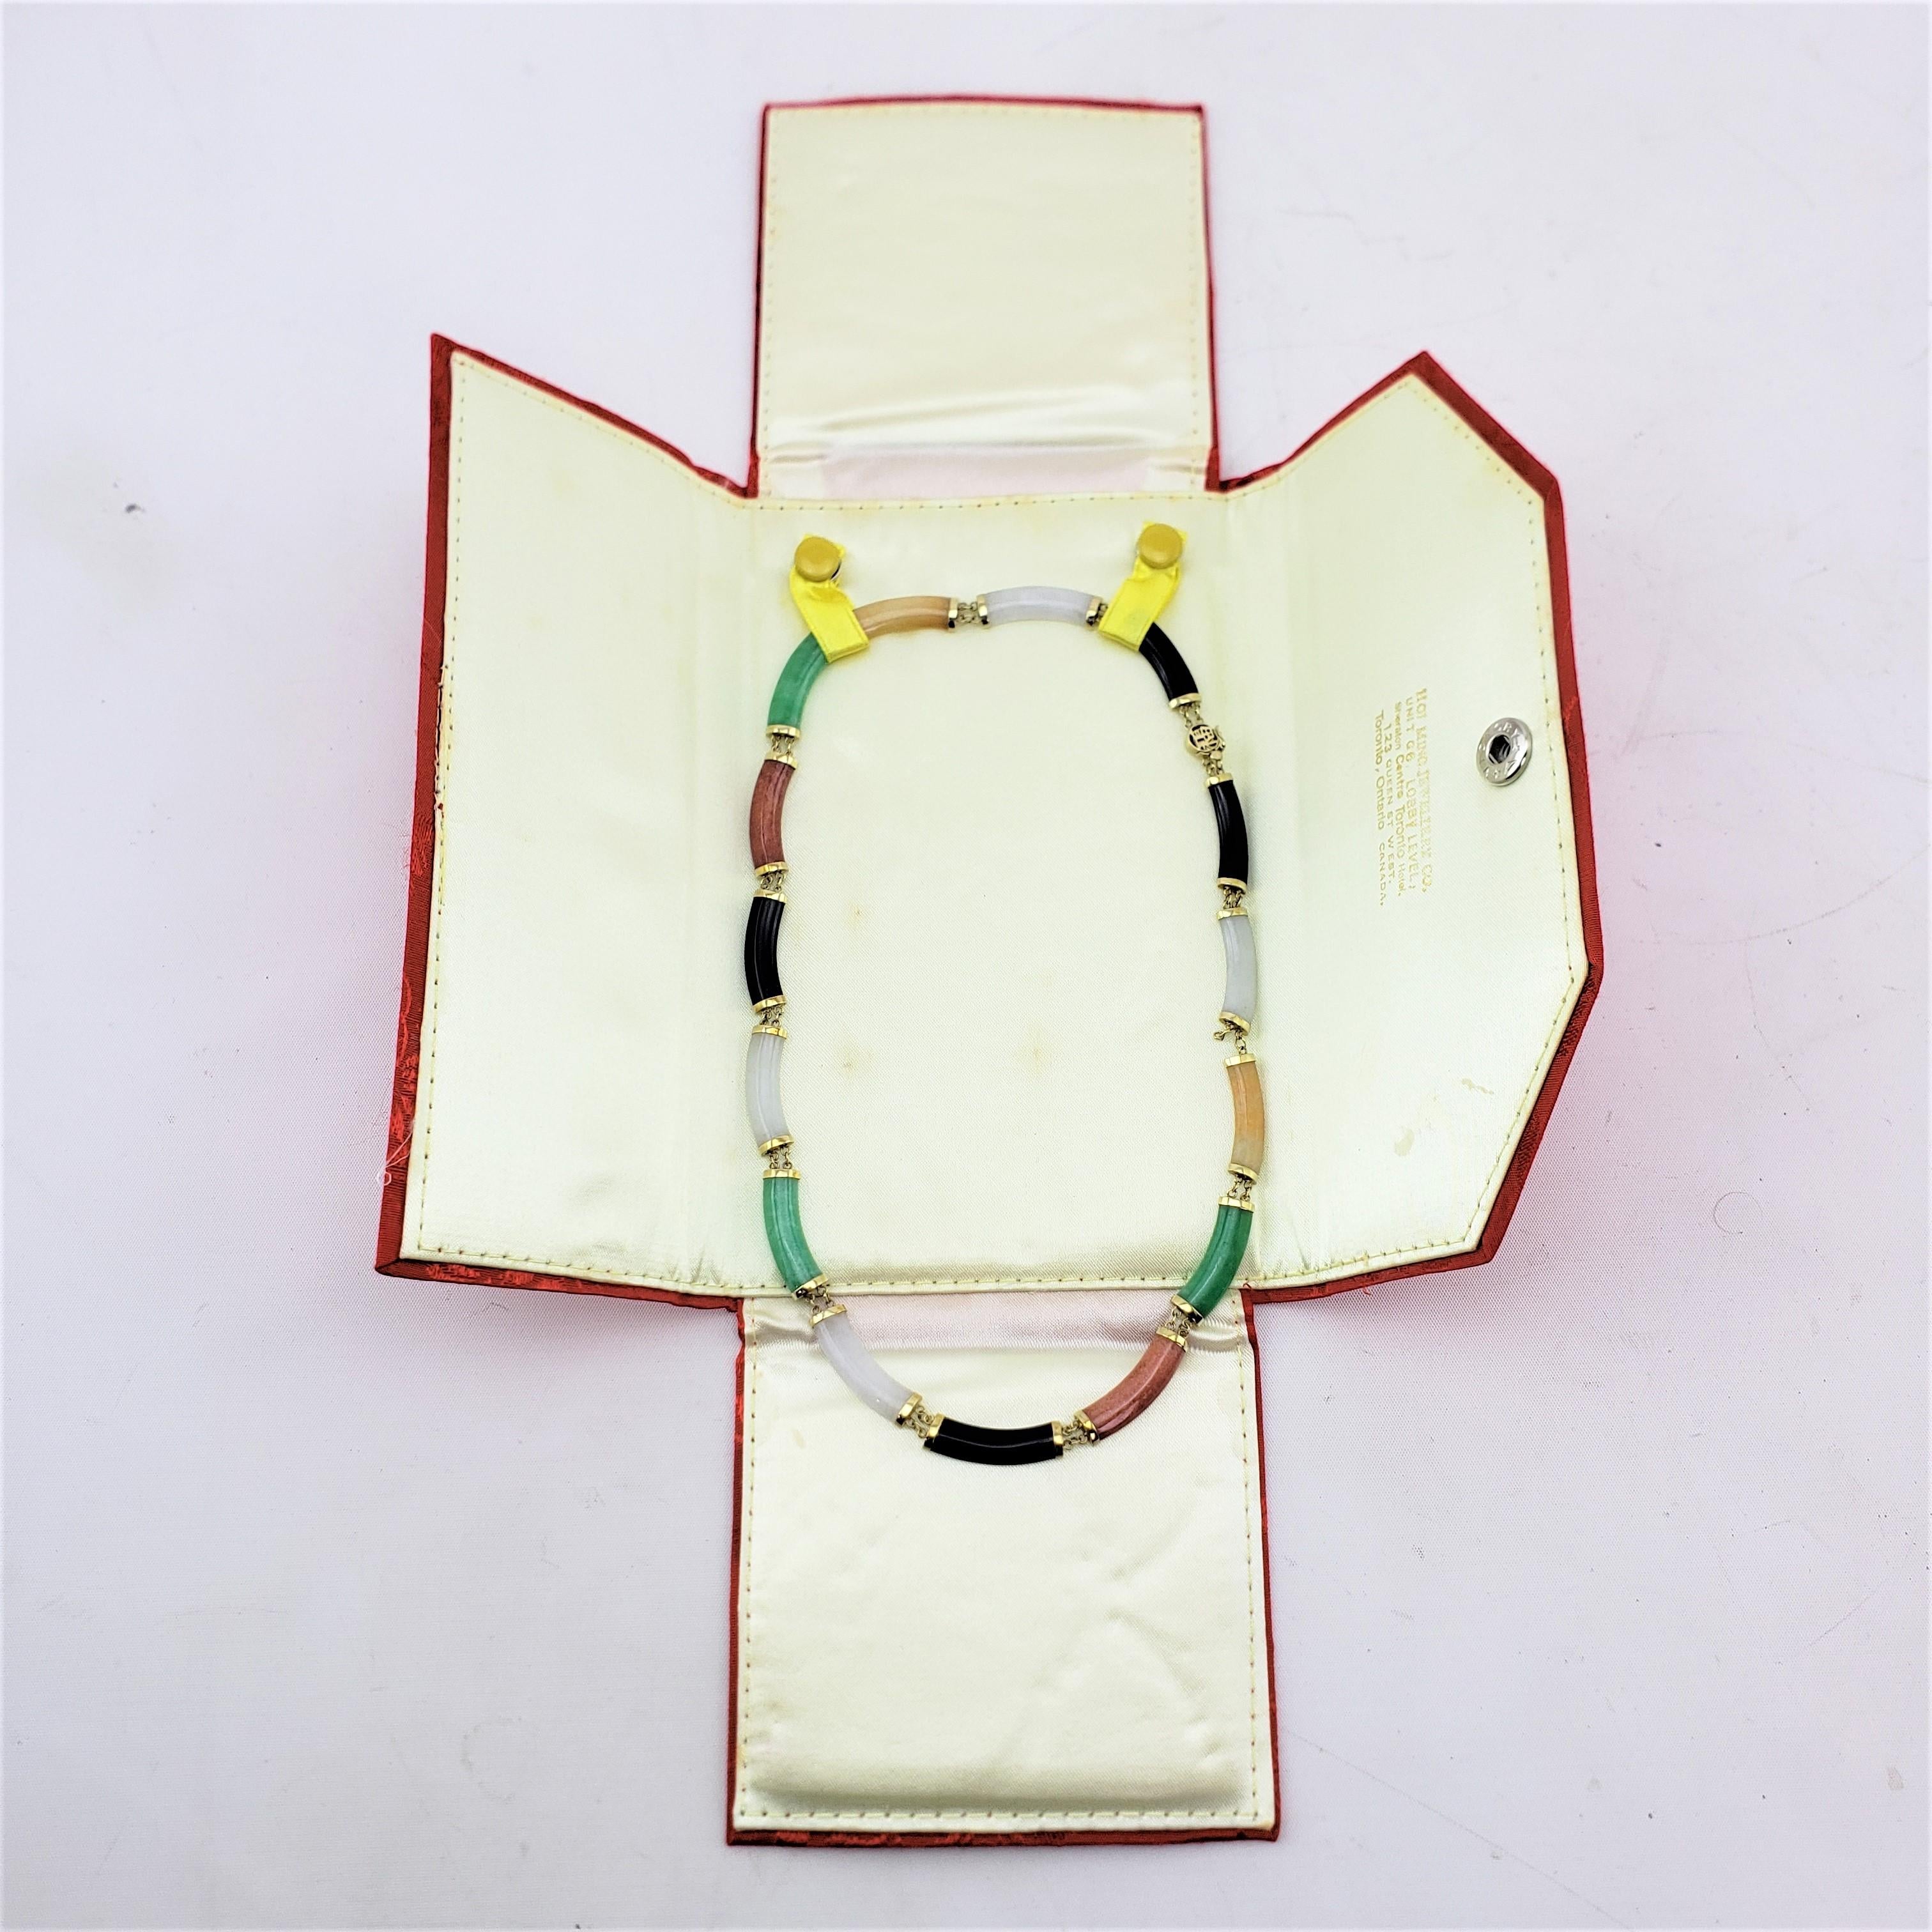 This necklace may be signed by an unknown maker, but did originate from China and date to approximately 1970 and done in the period Mid Century Modern style. The necklace is composed of 14 karat yellow gold which accents the semi--circular cut and